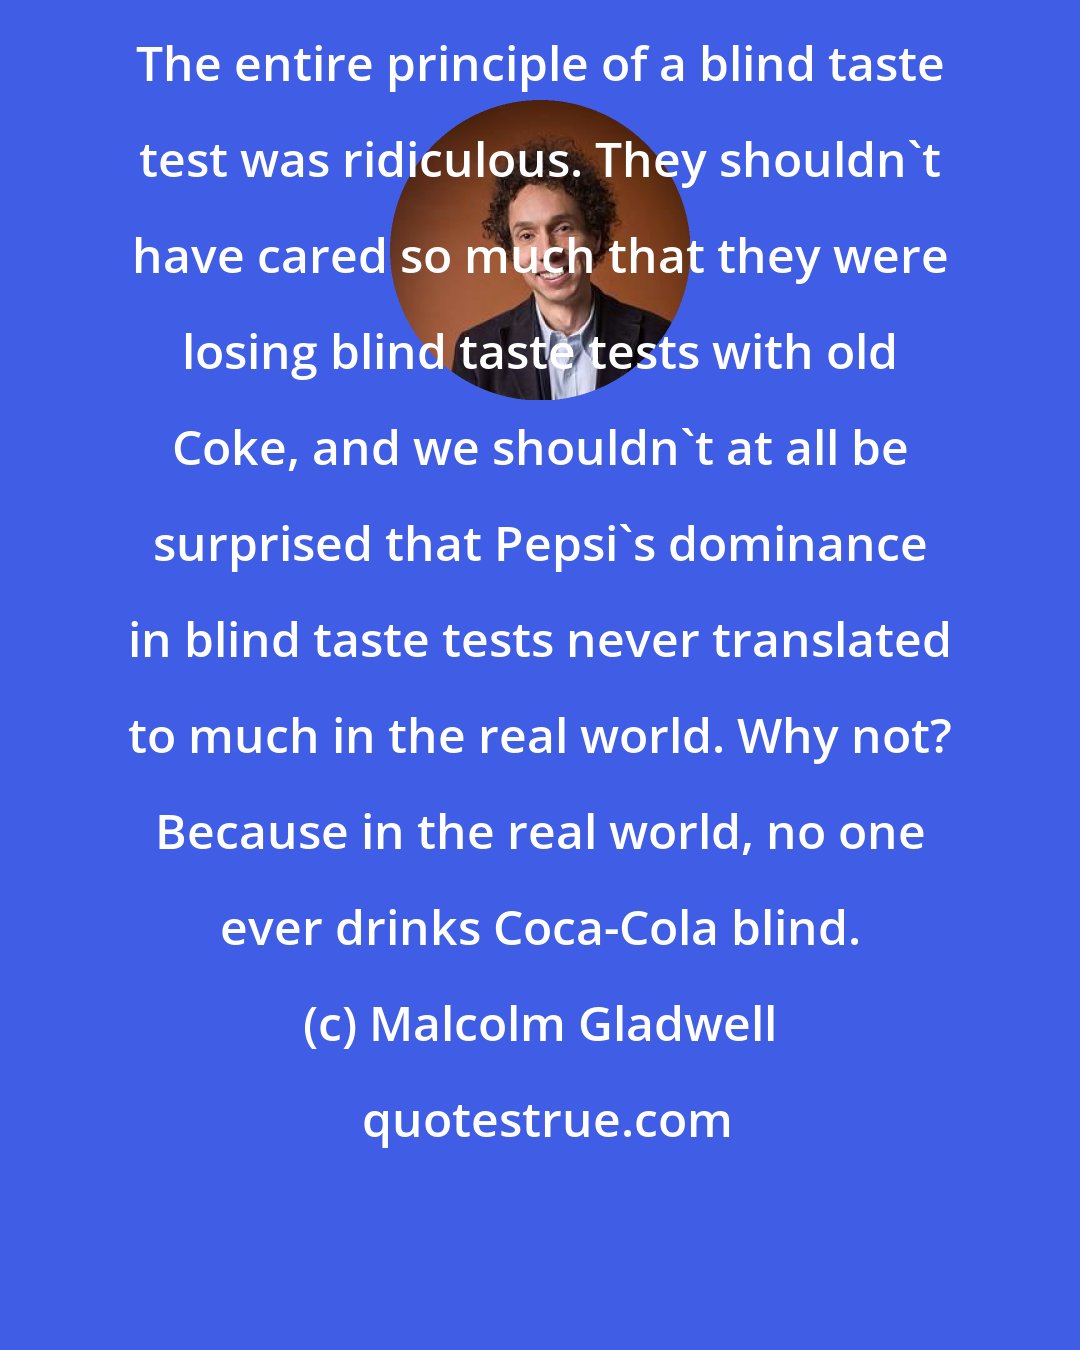 Malcolm Gladwell: The entire principle of a blind taste test was ridiculous. They shouldn't have cared so much that they were losing blind taste tests with old Coke, and we shouldn't at all be surprised that Pepsi's dominance in blind taste tests never translated to much in the real world. Why not? Because in the real world, no one ever drinks Coca-Cola blind.